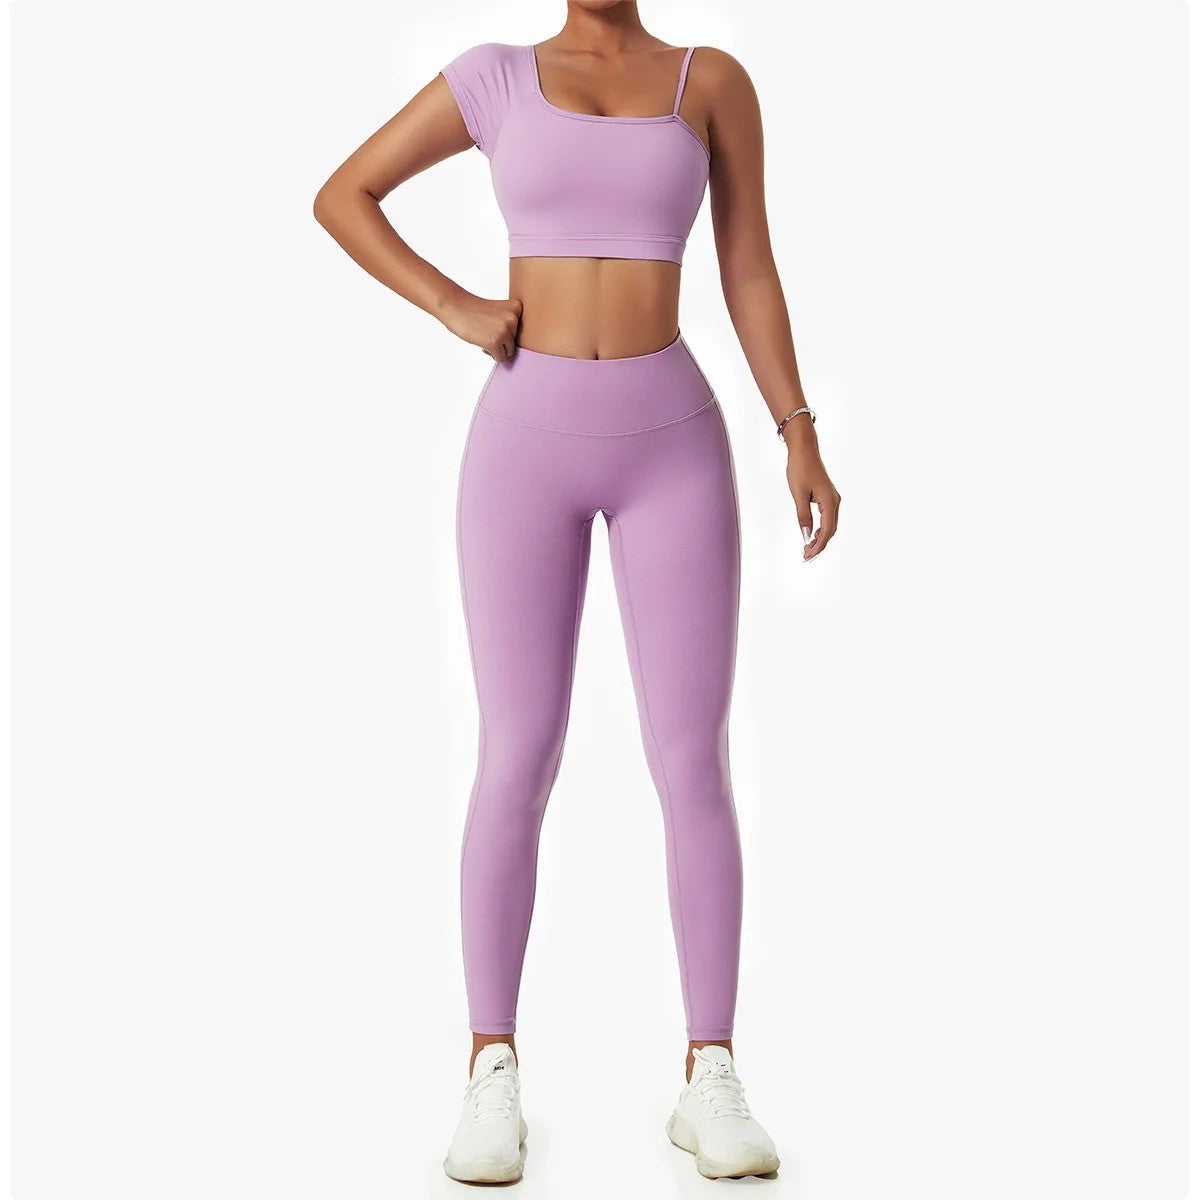 GymBabe Three Piece Set in Lilac (Made with recycled material)